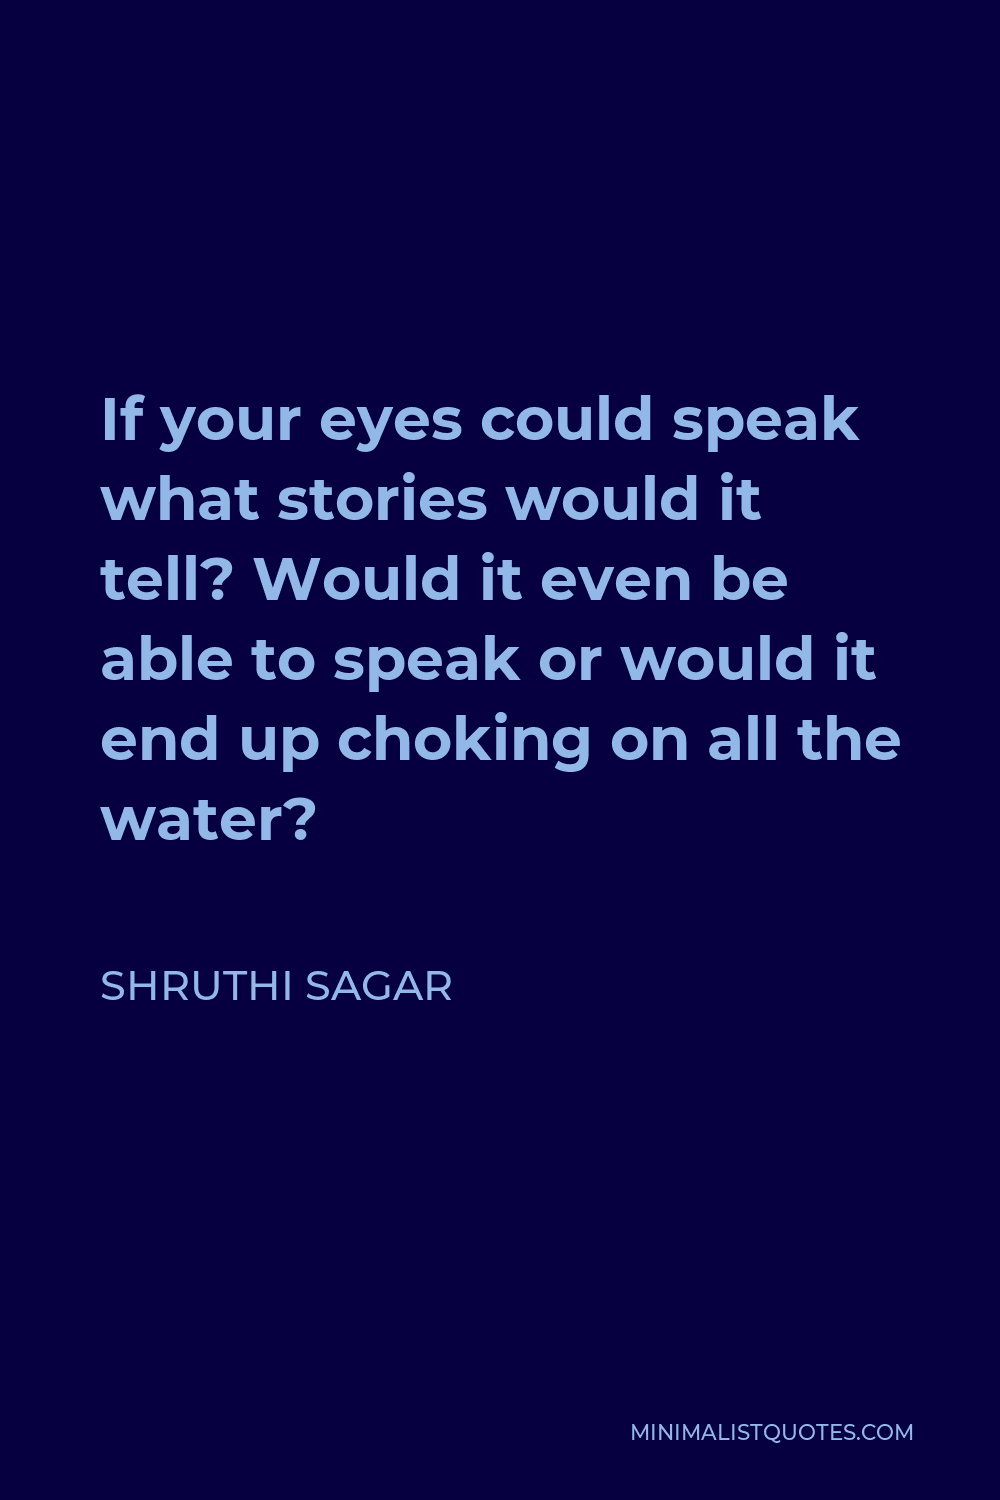 Shruthi Sagar Quote - If your eyes could speak what stories would it tell? Would it even be able to speak or would it end up choking on all the water?